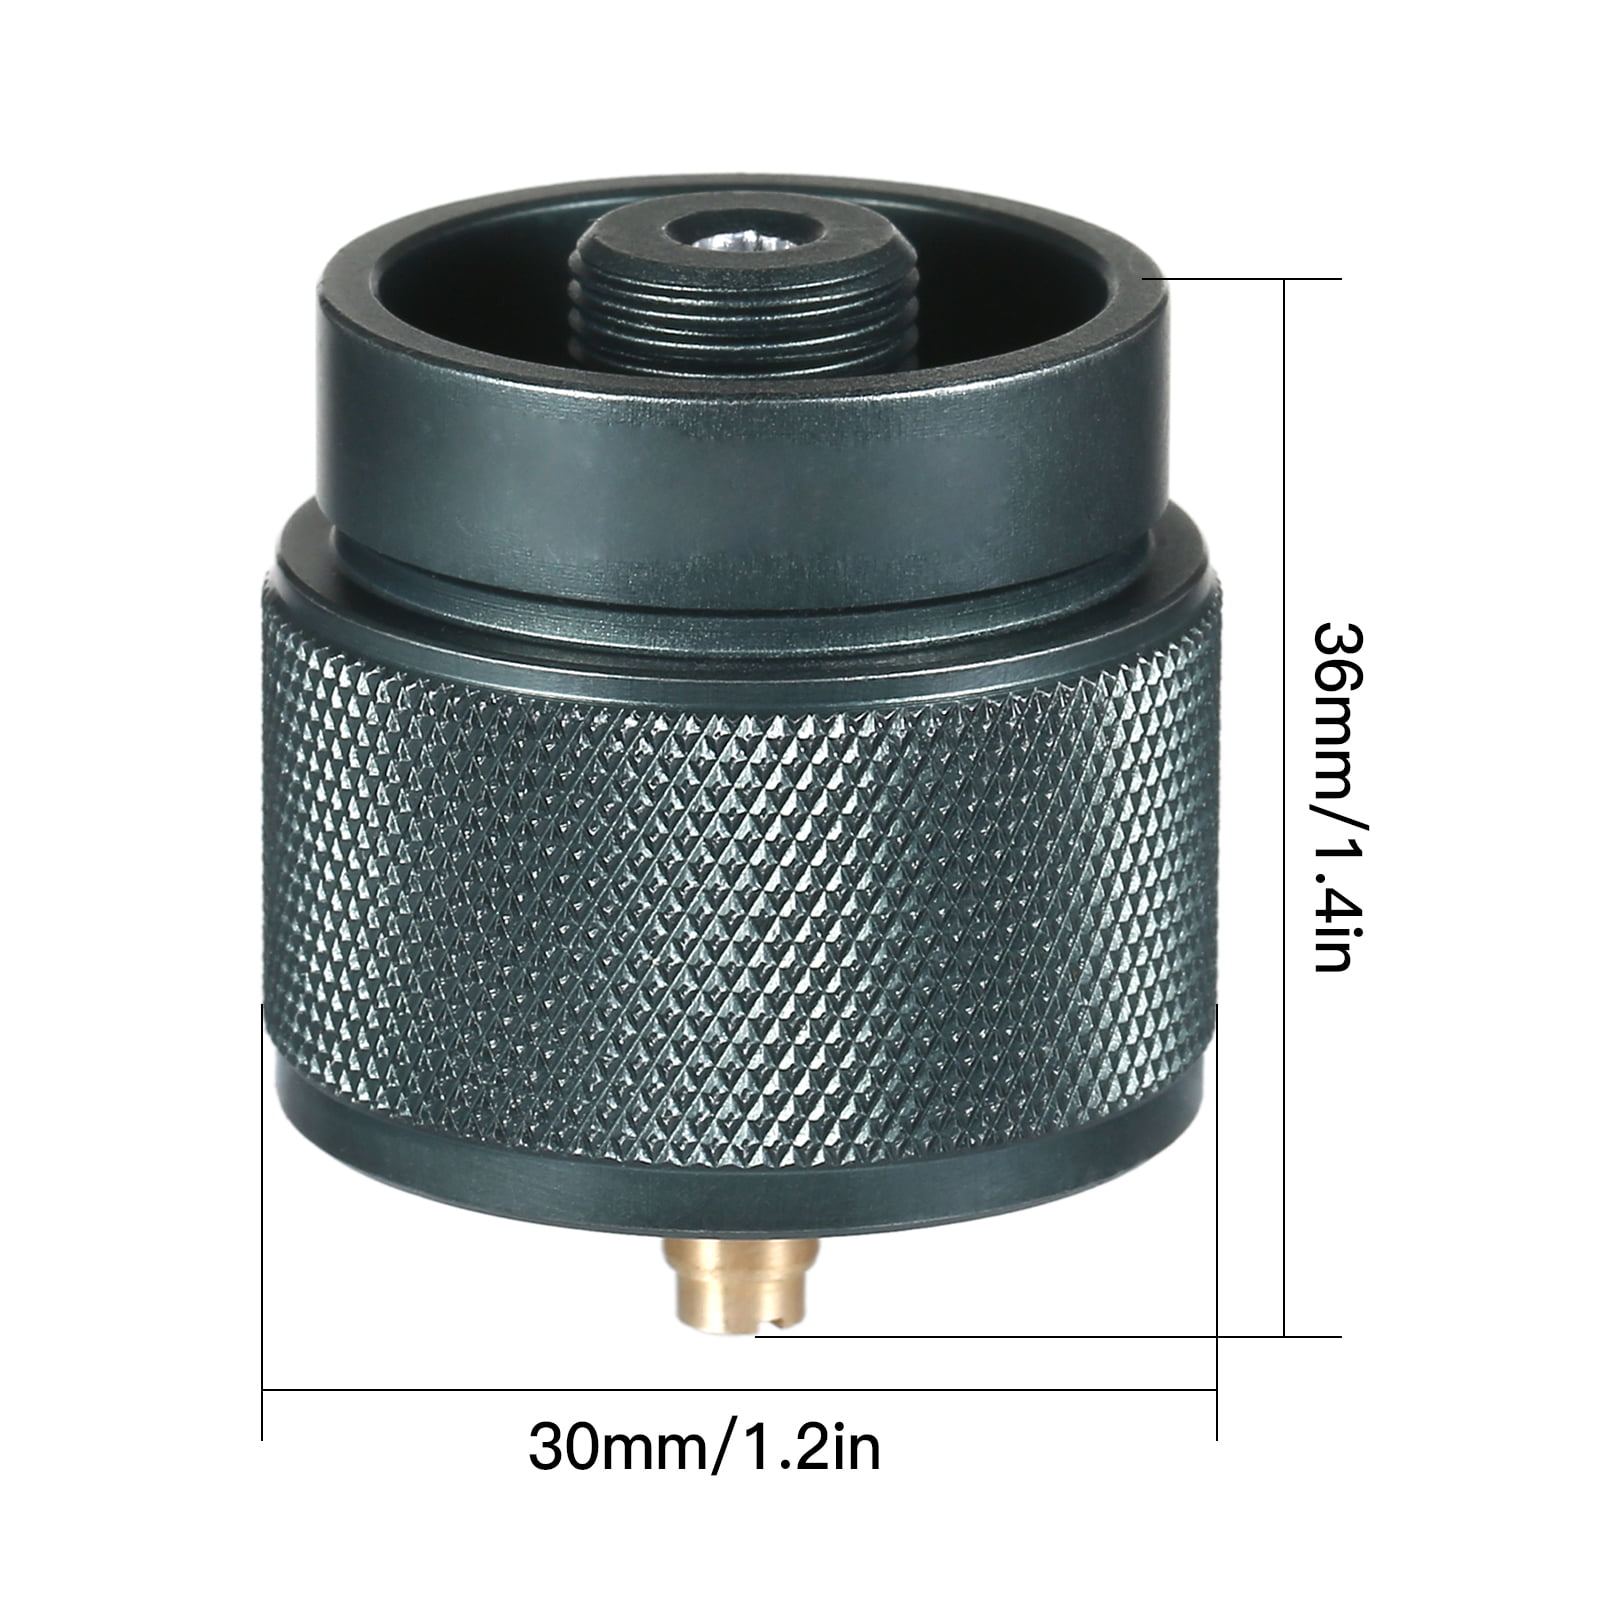 Camping Stove Adapter 1 Lb Propane Small Tank Input EN417 Lindal Valve  Output Cylinder LPG Canister Adapter/Flat Canister to 1L MAPP Gas Tank  Adapter